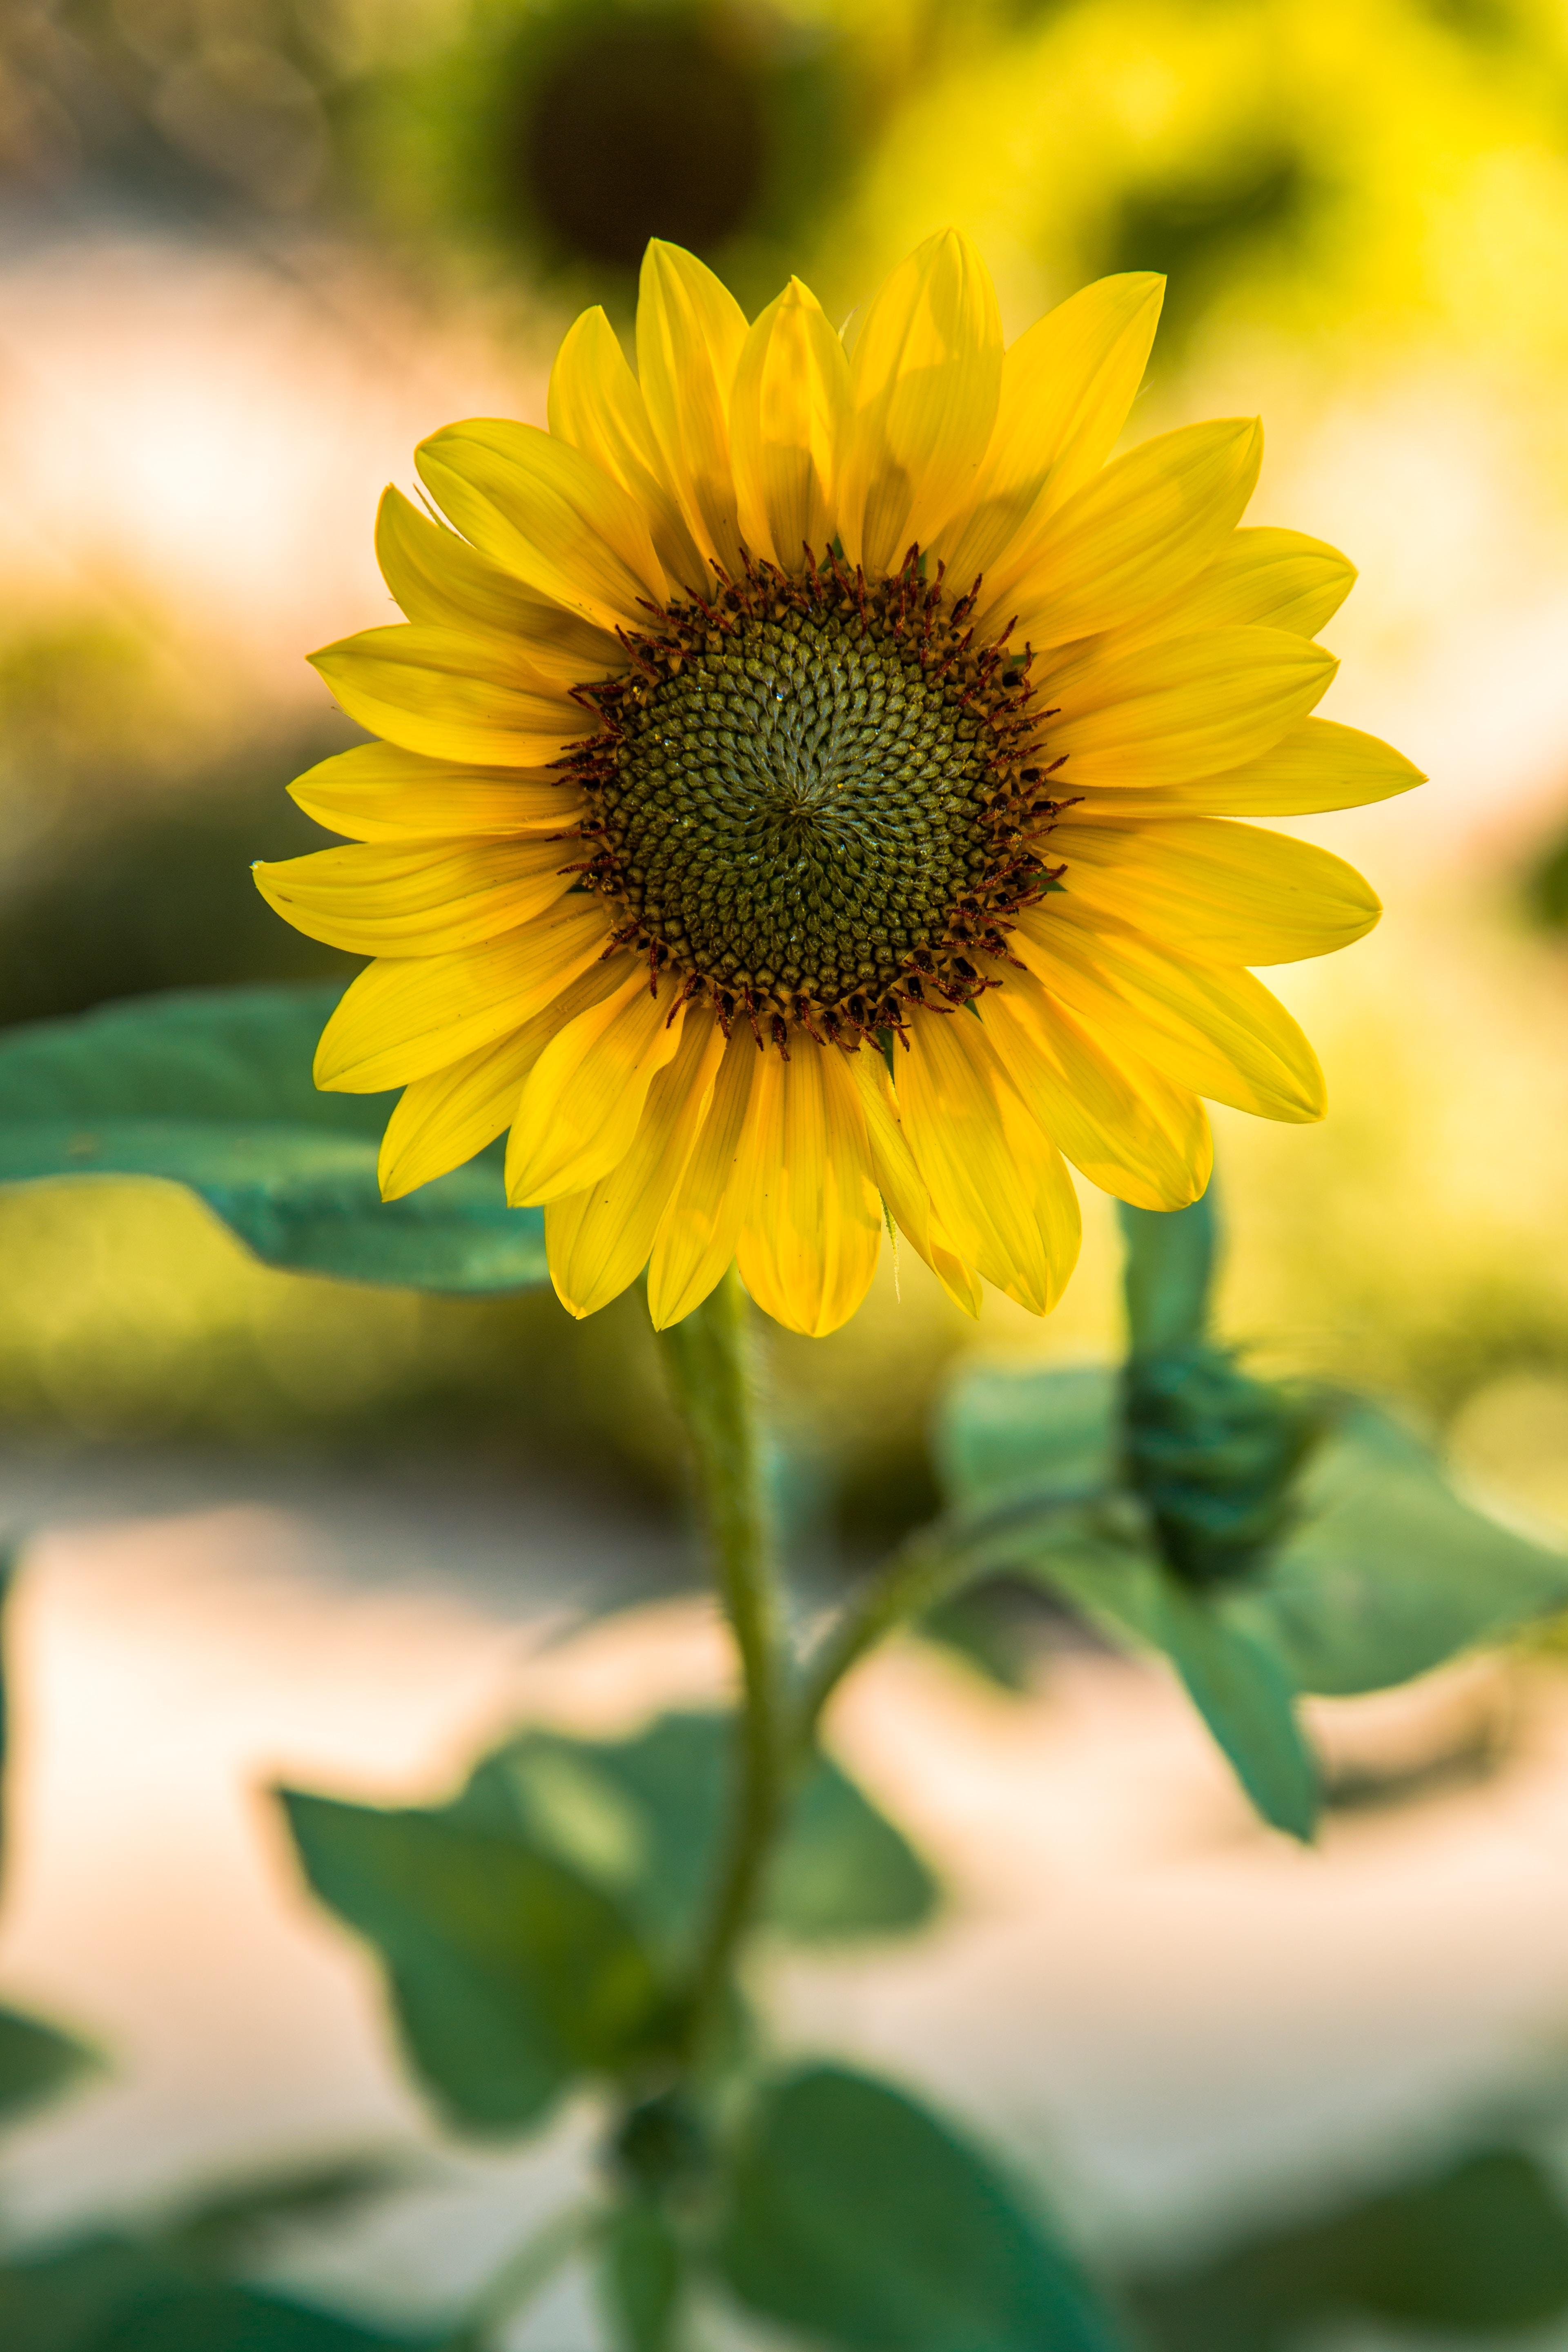 Sunflower Image: Download HD Picture & Photo